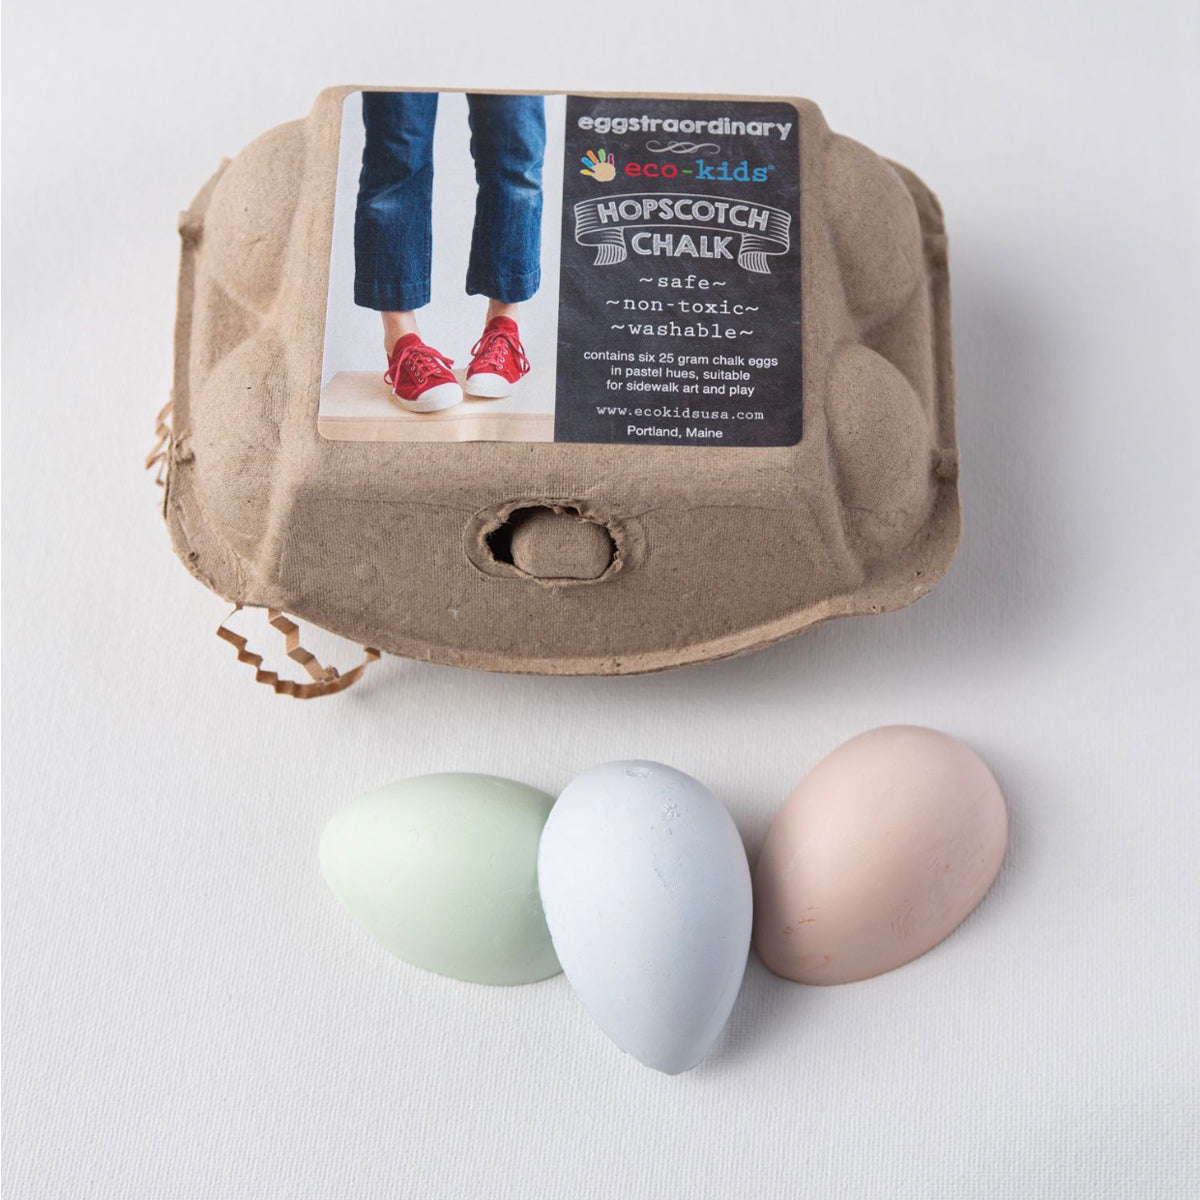 egg coloring & grass growing kit